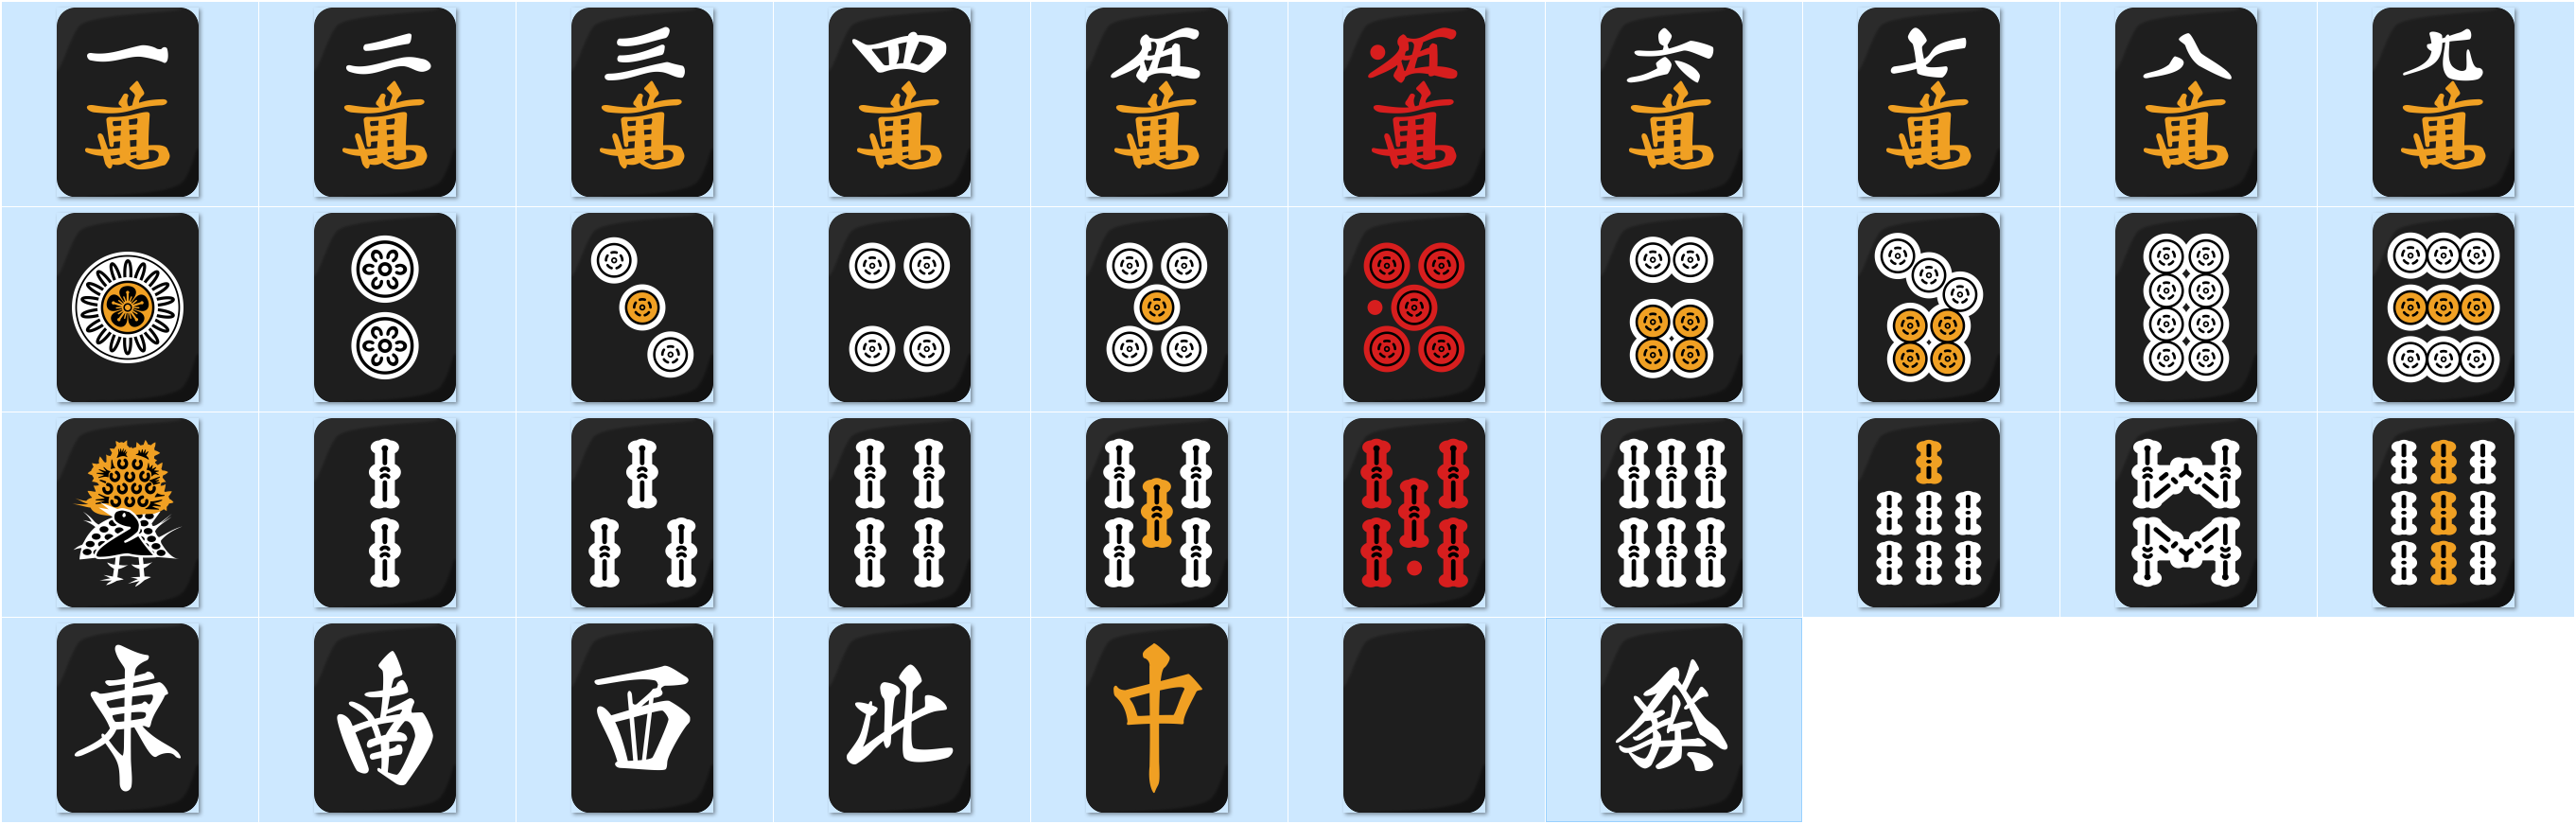 File:Mahjong with concealed kong.jpg - Wikimedia Commons